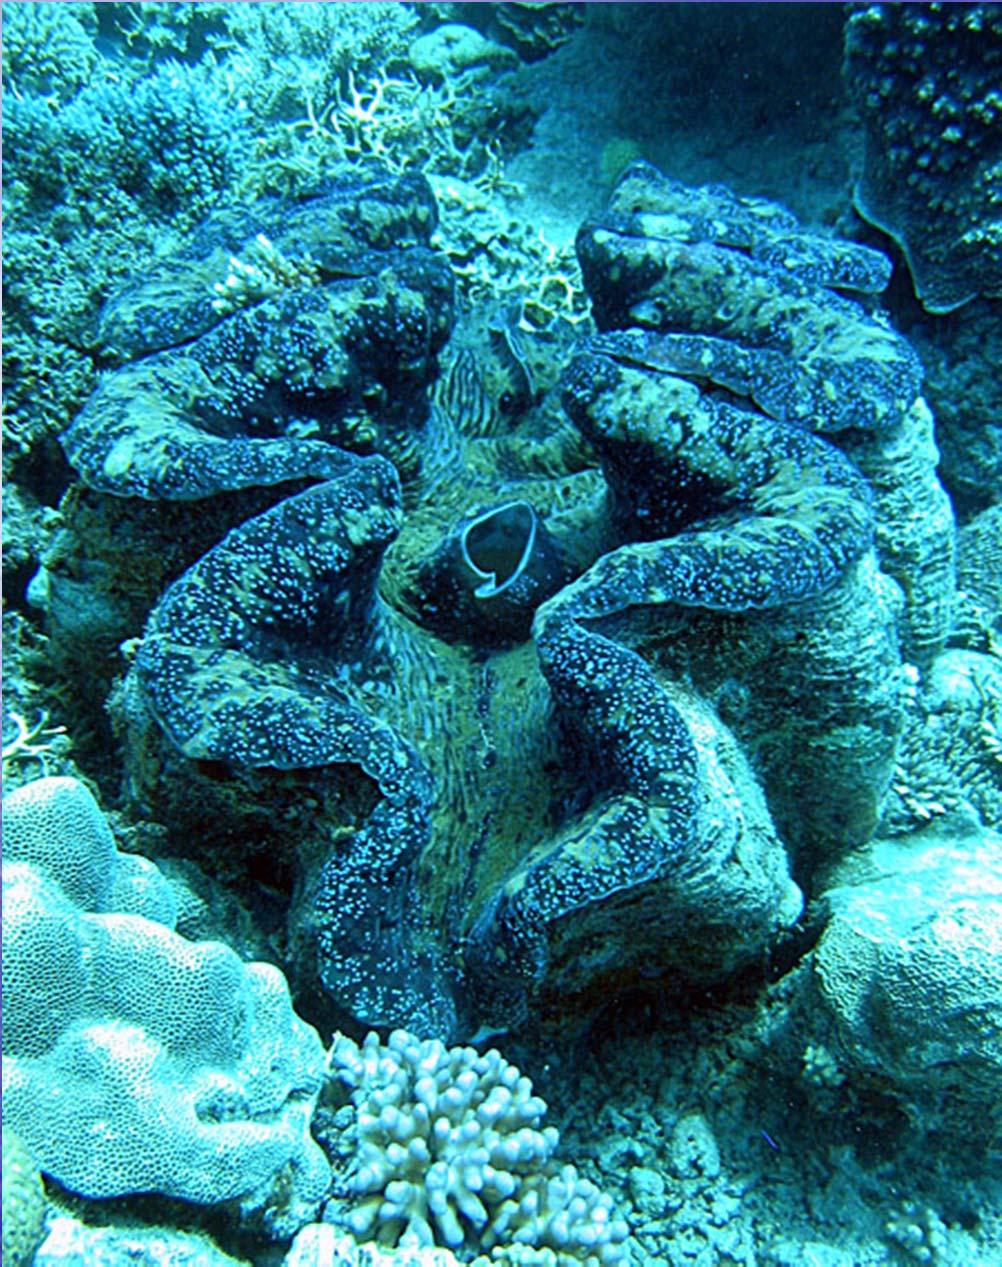 The Bivalves : two shell Possess 2 shells that GIANT CLAM can be tightly closed with strong muscles Strong, muscular foot and use it for locomotion No head or teeth Obtain food